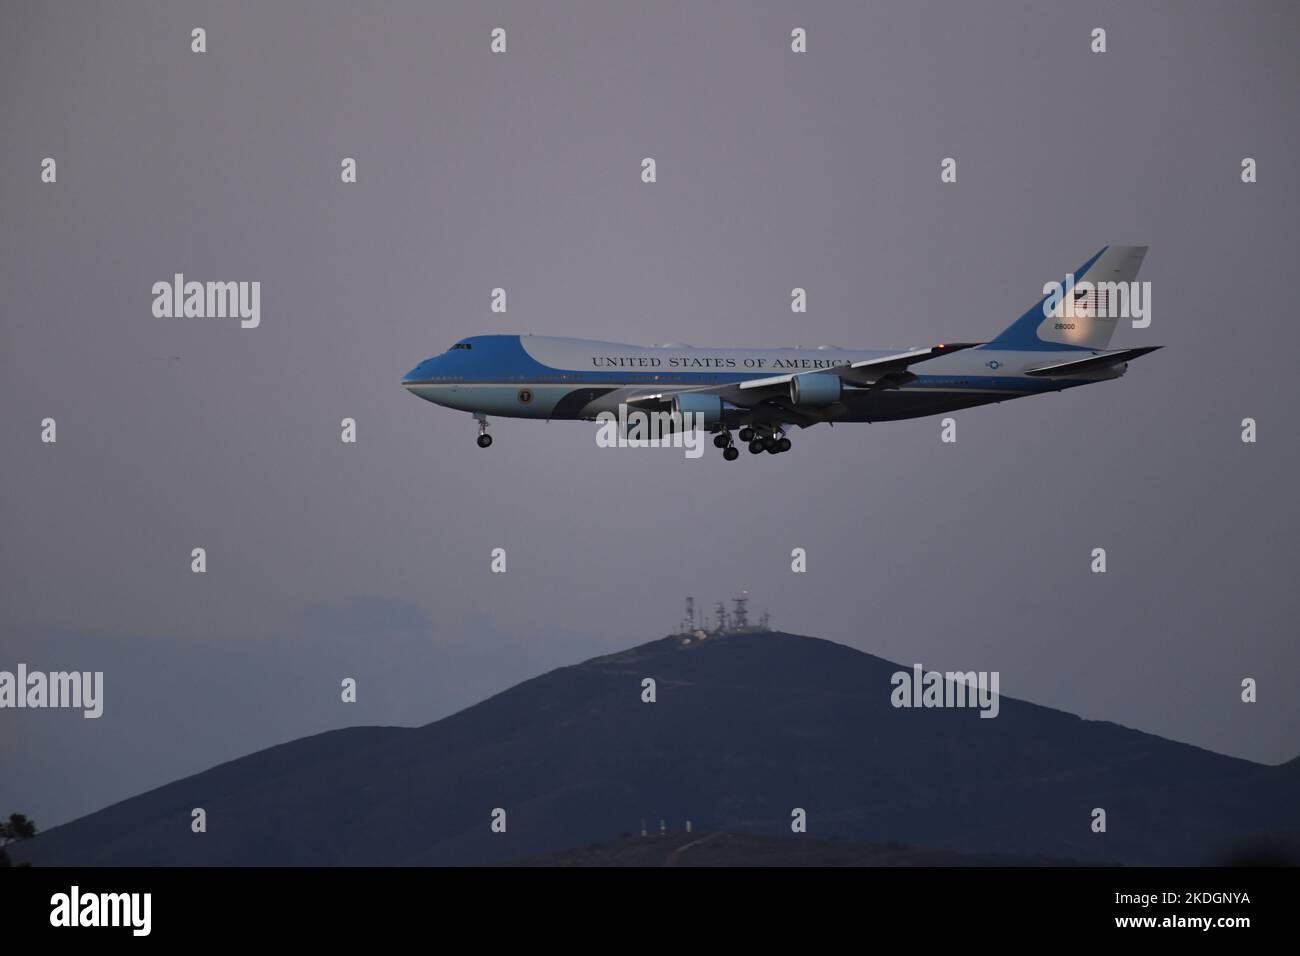 Air Force 1 on final,  arriving at MCAS Miramar in San Diego, California Stock Photo